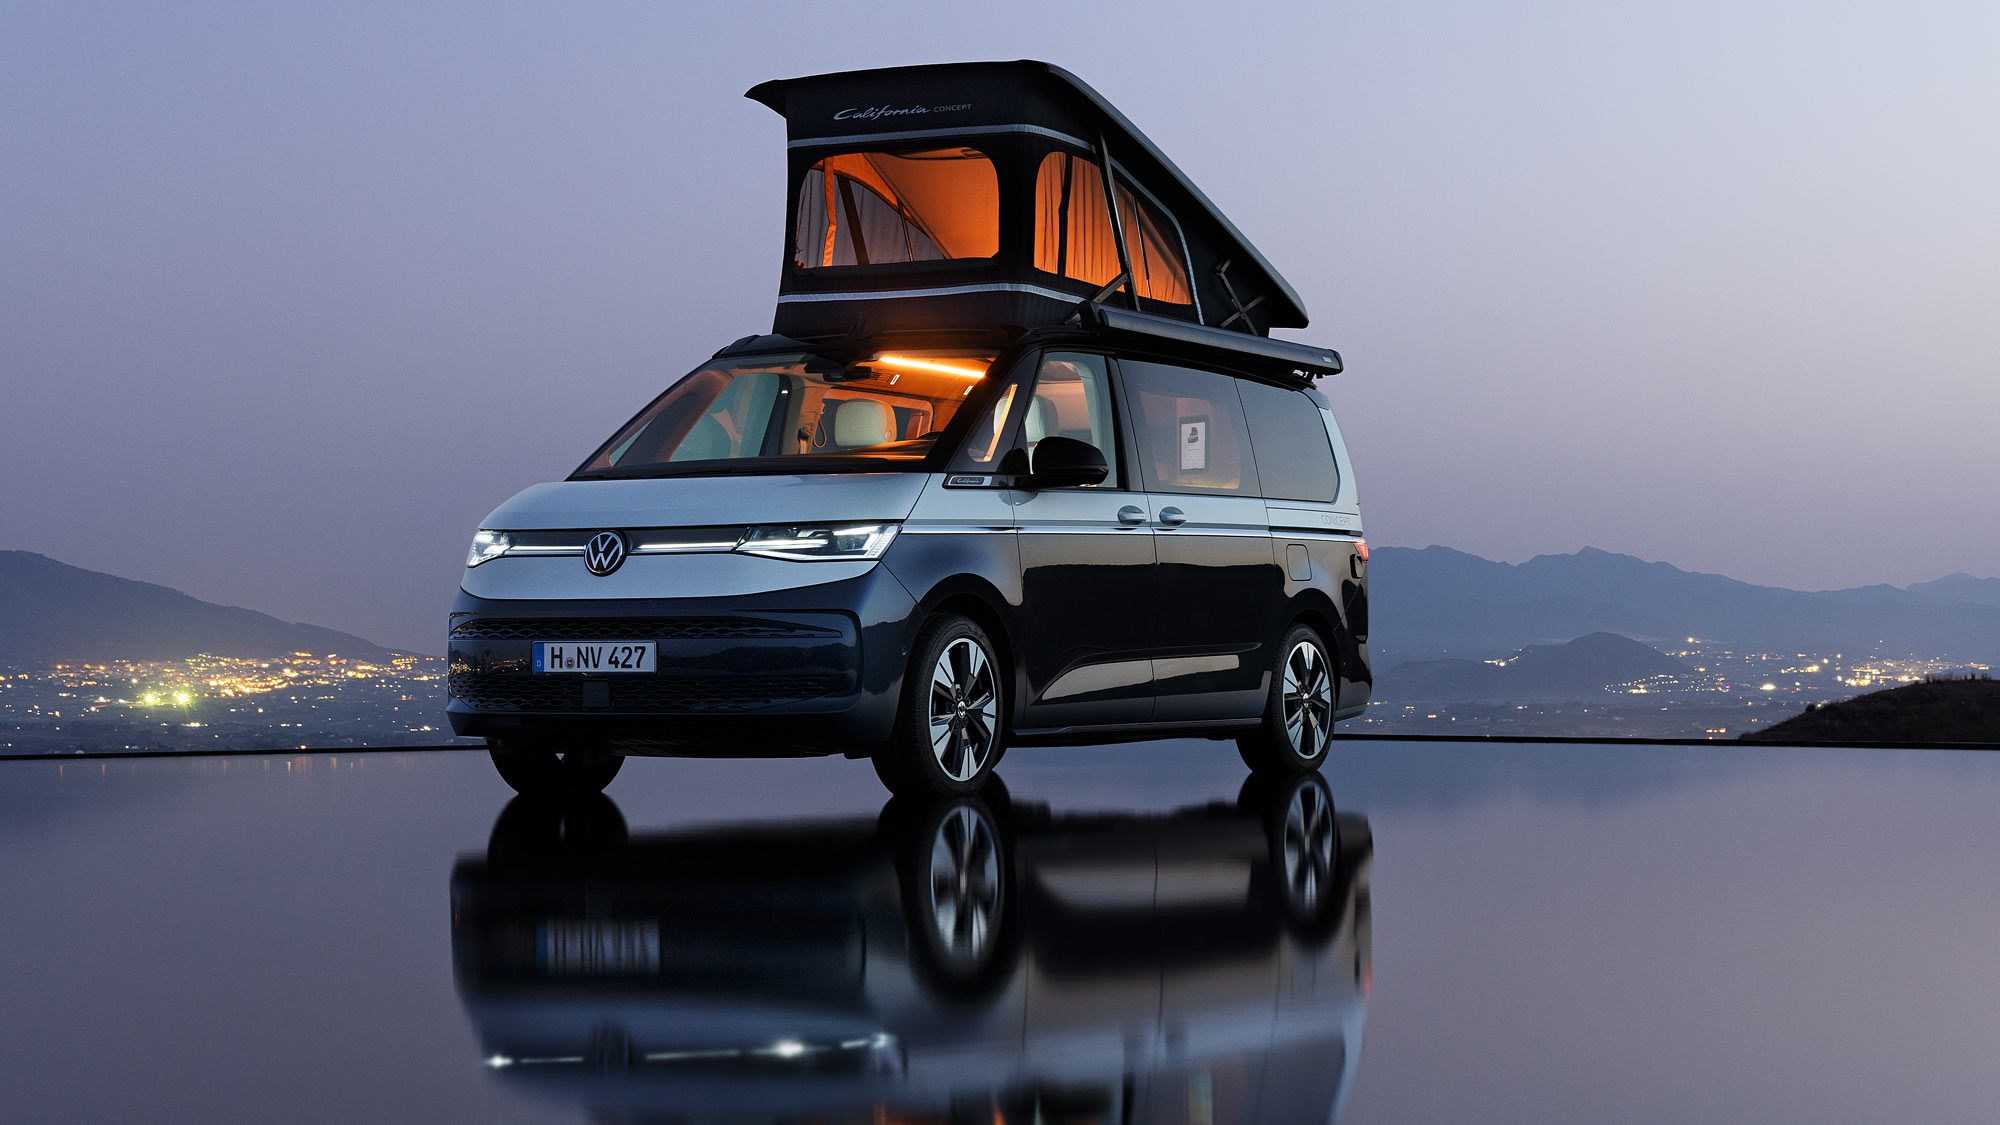 All-new vw california with plugged-in camping revealed in full | car magazine